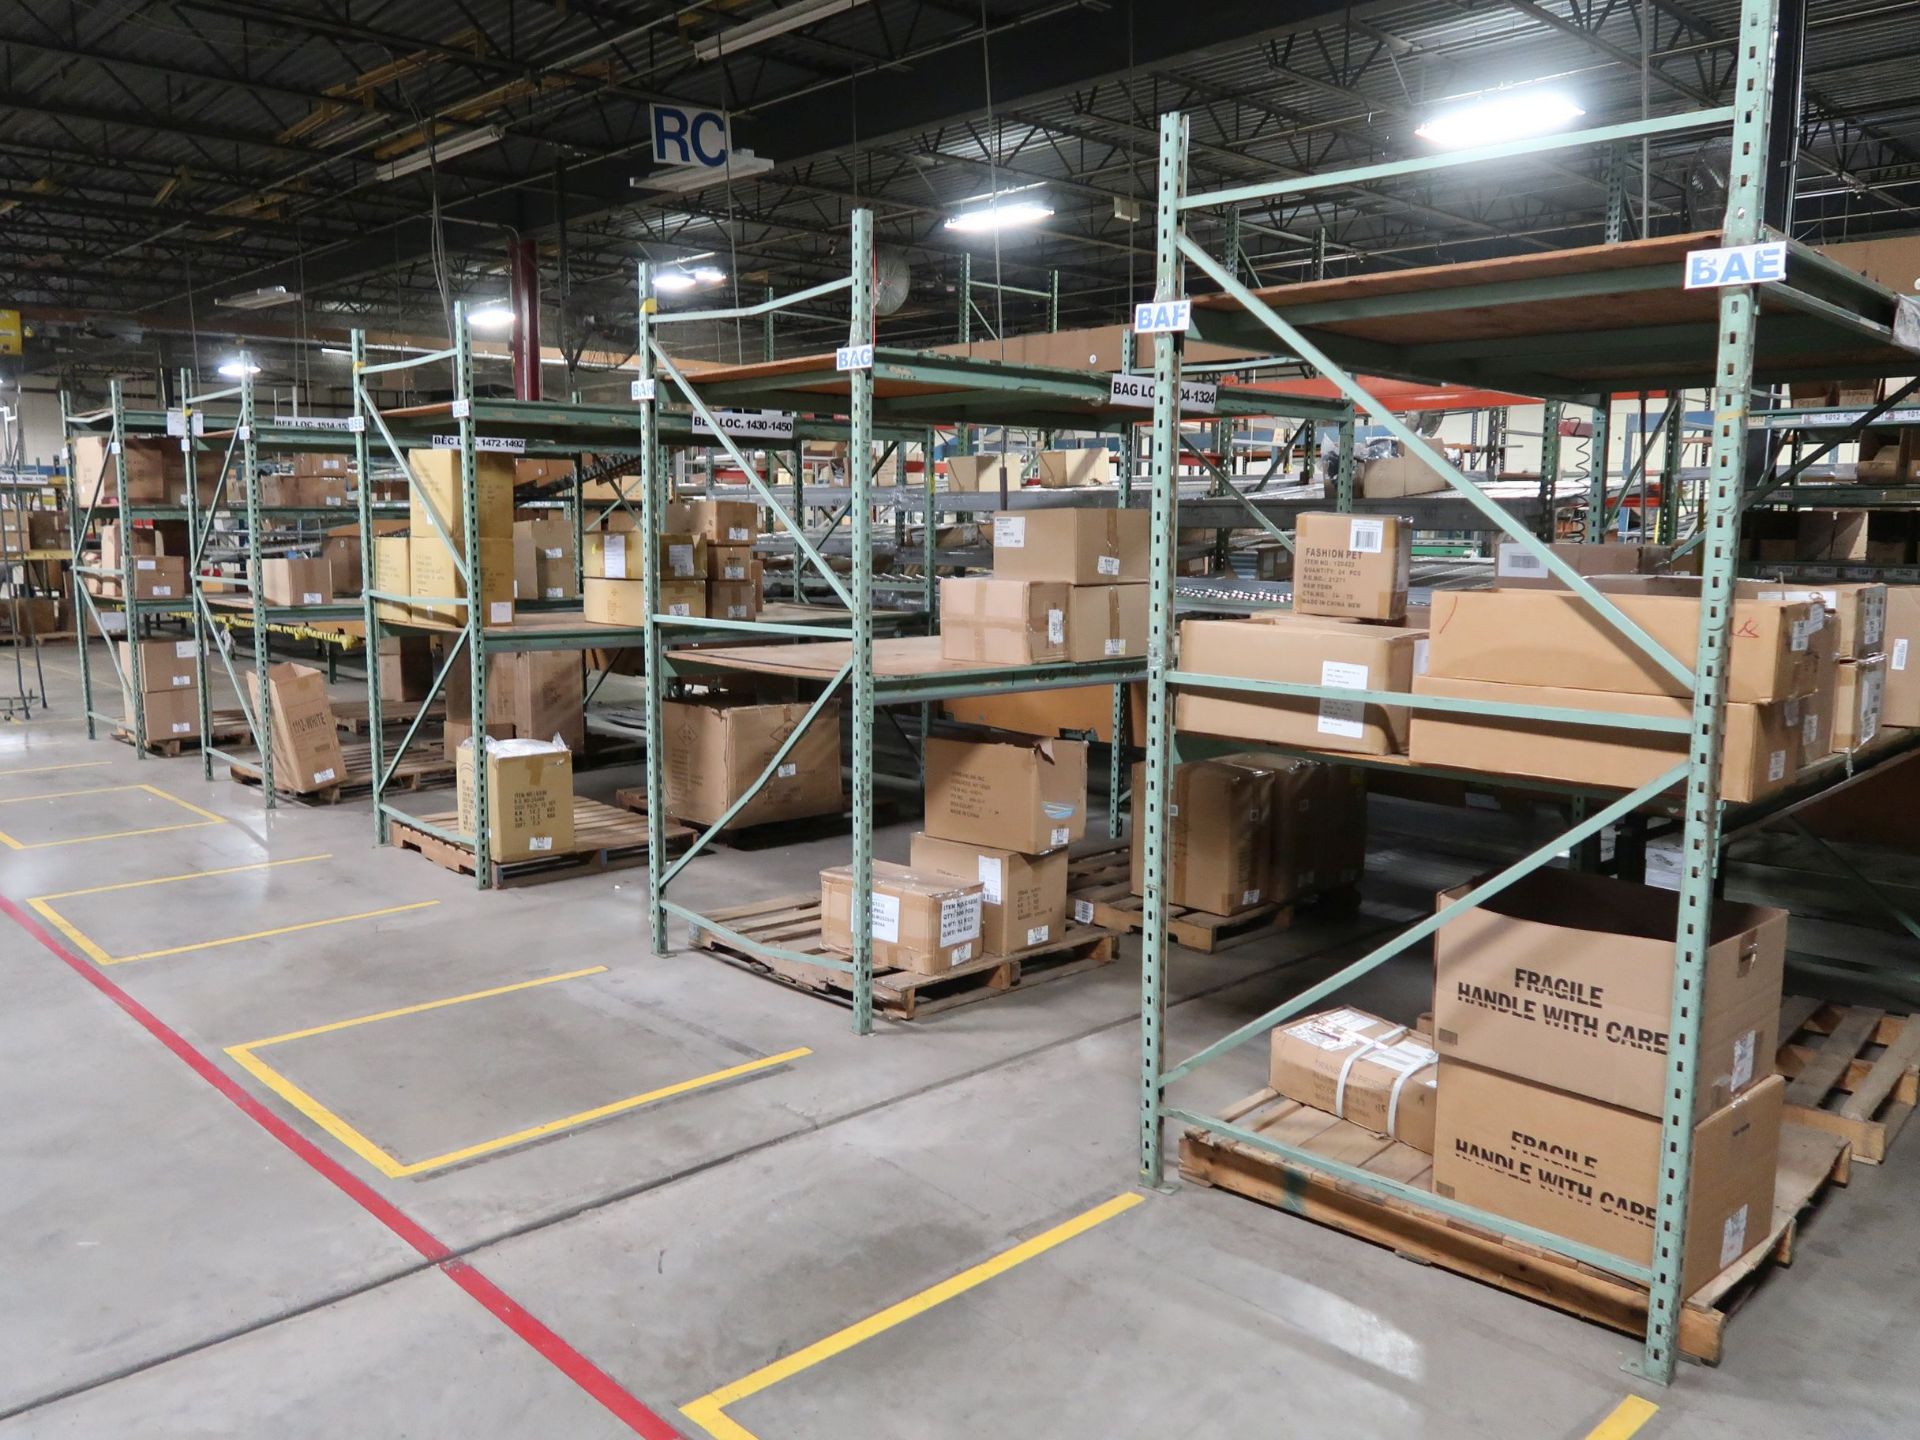 SECTIONS 96" X 48" X 96" ADJUSTABLE BEAM PALLET RACK; (10) SECTIONS 48" X 96" UPRIGHTS, (22) 96"